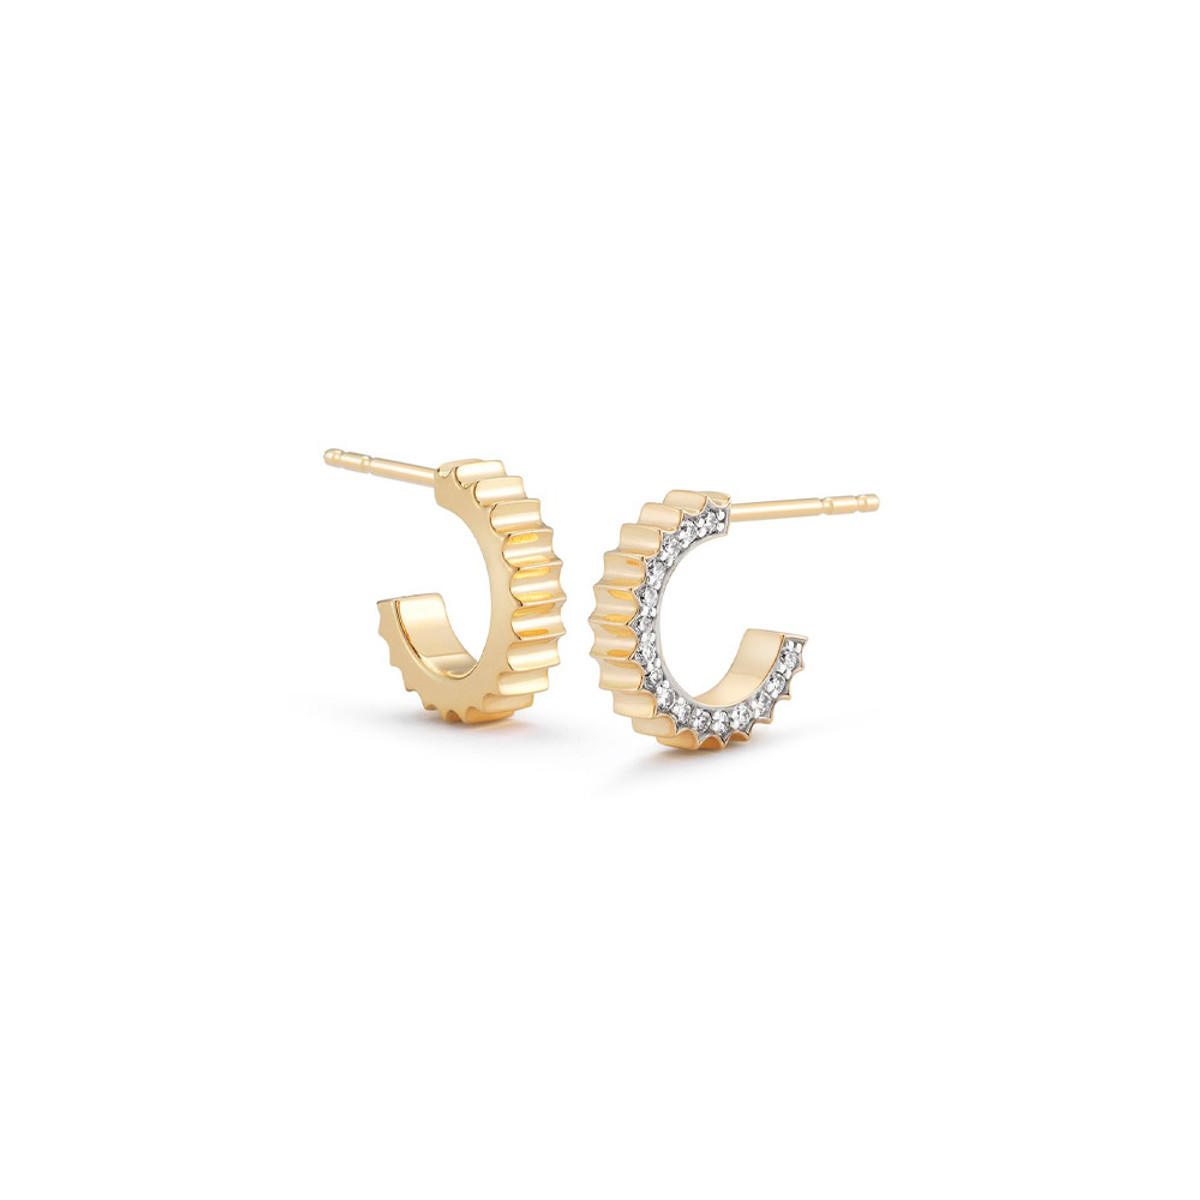 Walters Faith Clive 18K Yellow Gold and Diamond Fluted Huggie Earring-56179 Product Image